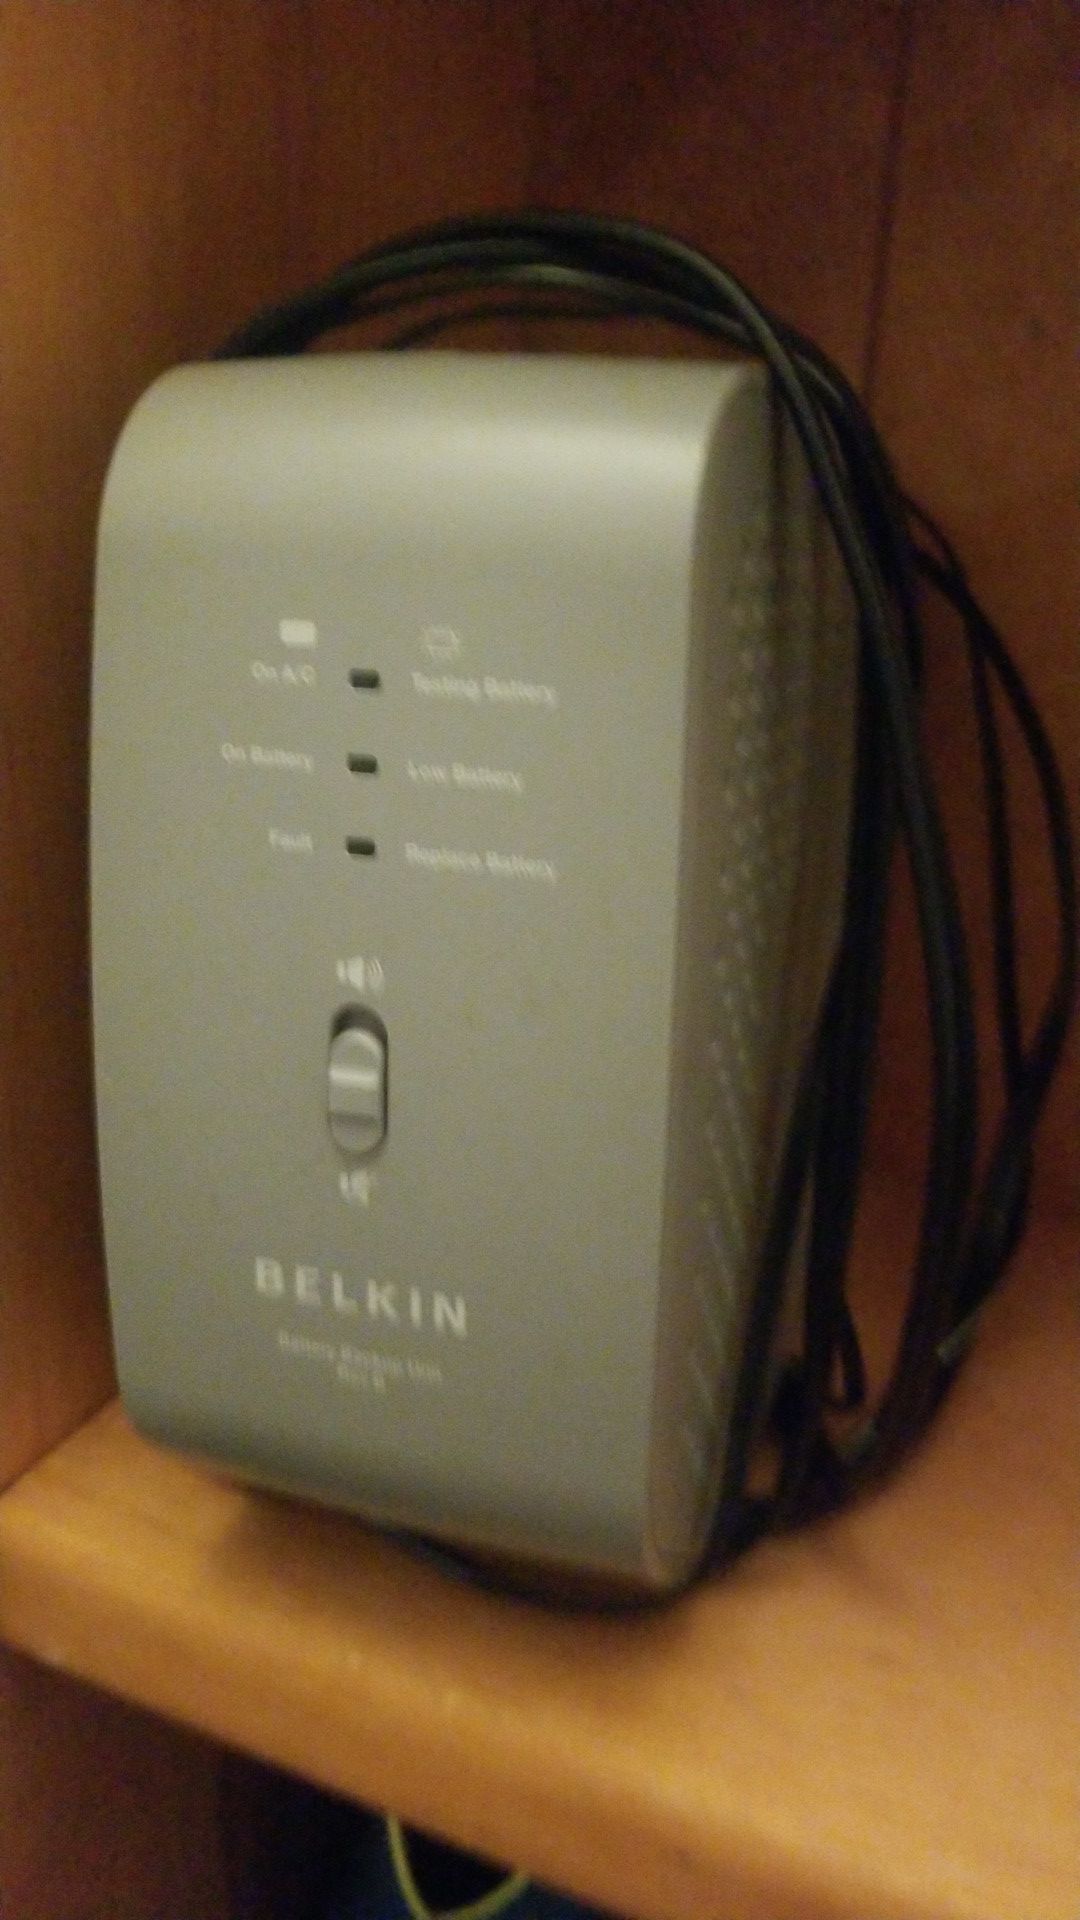 Belkin back up battery surge protector for routers and modems